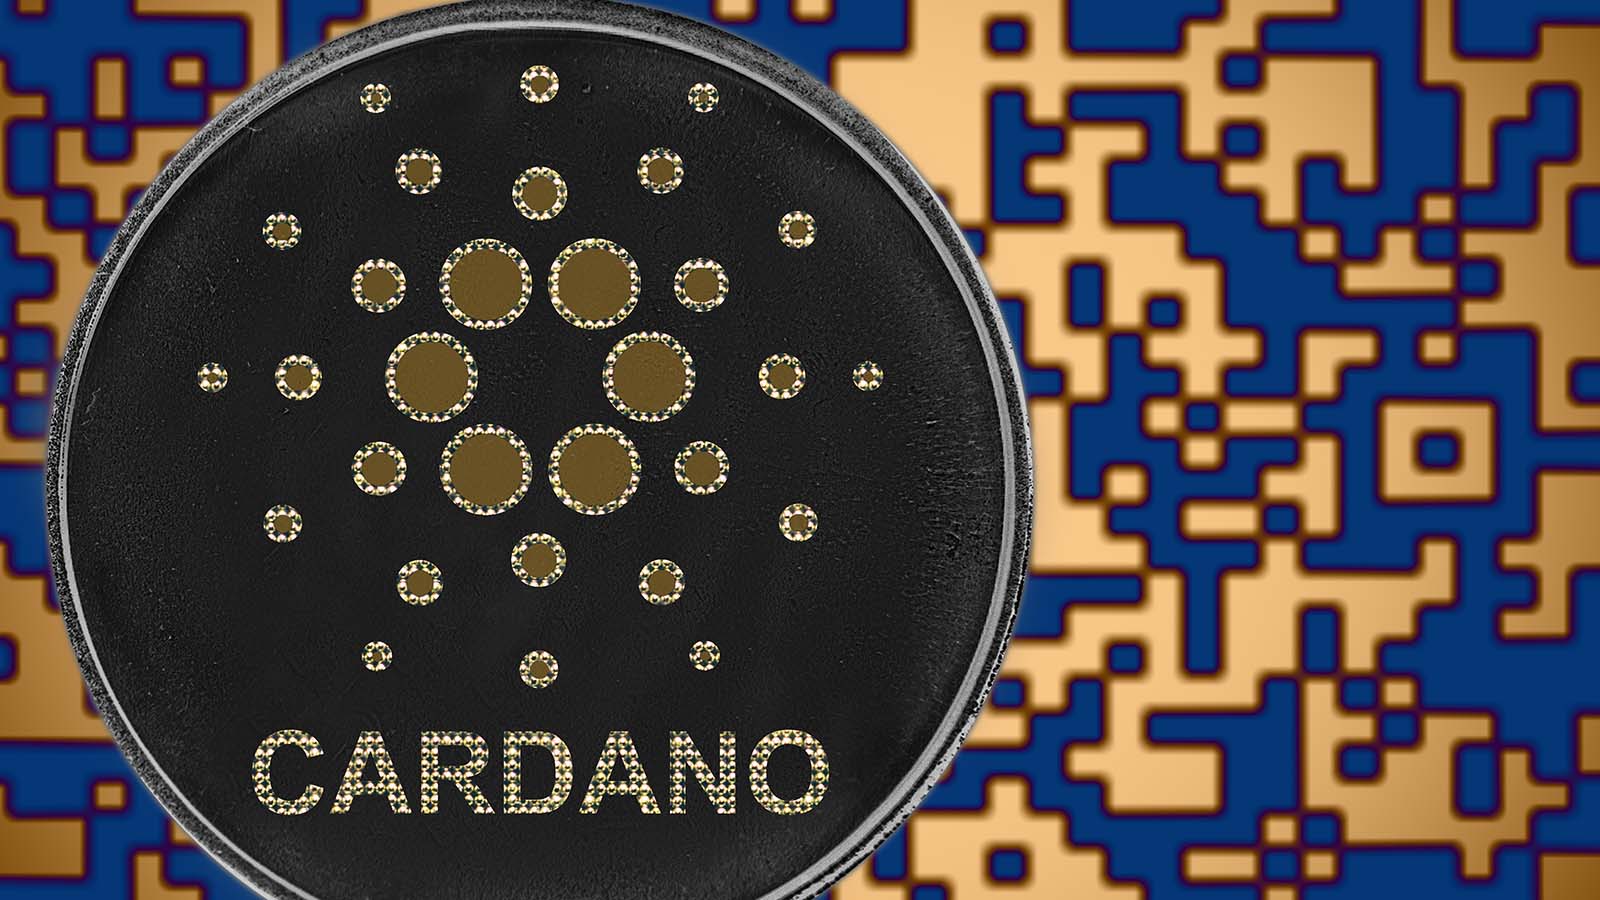 Cardano Token (ADA) with a blue and orange digital background.